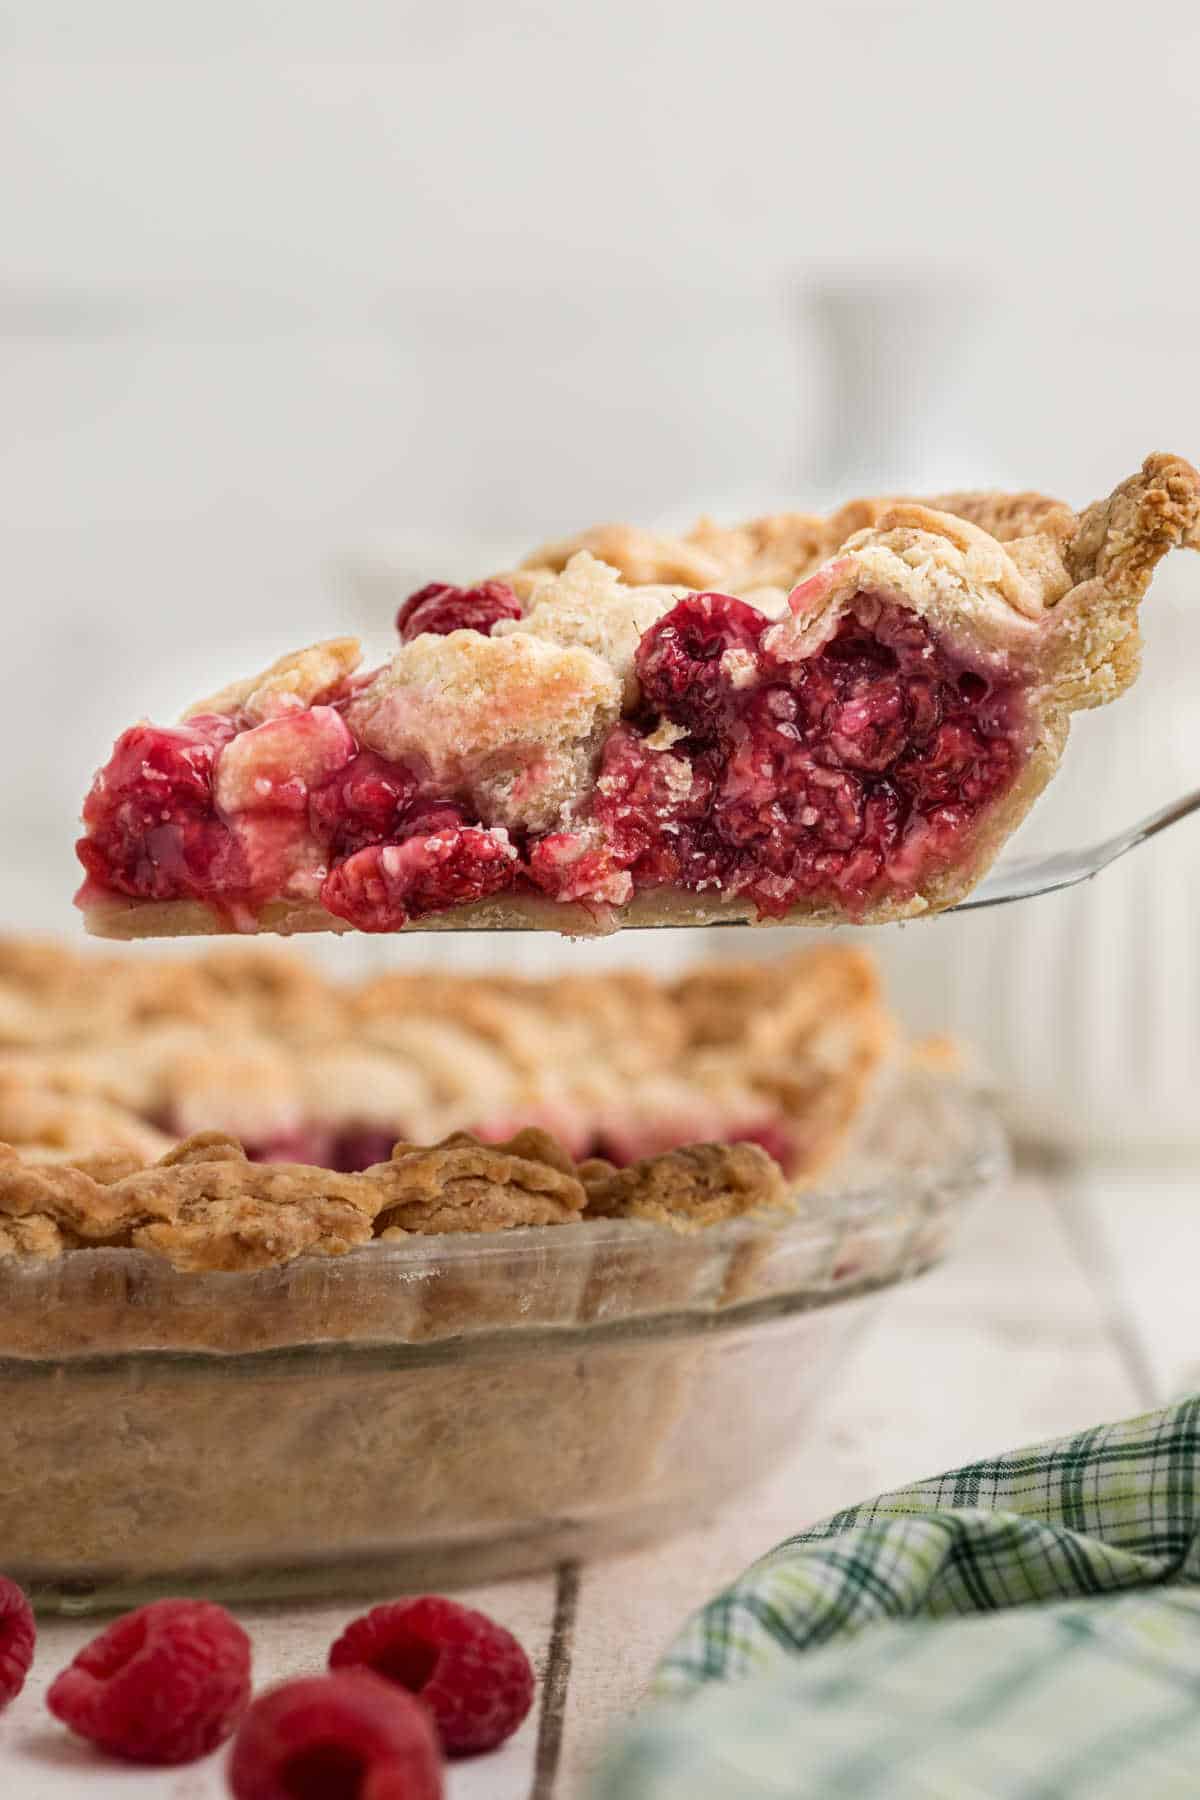 A slice of raspberry pie being lifted out of a pie dish.